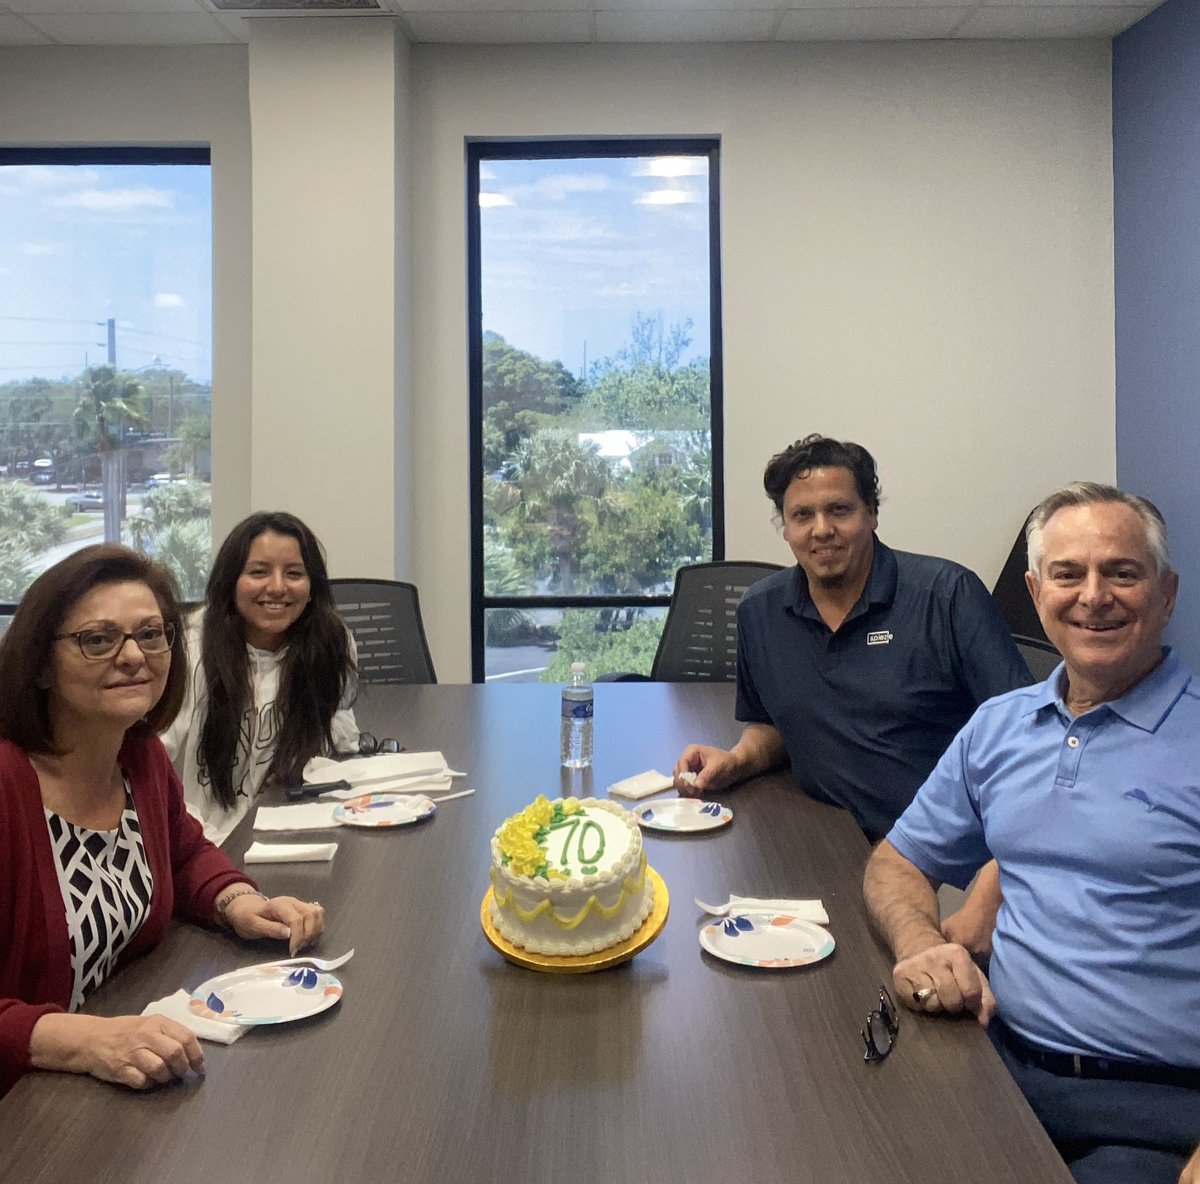 This week, our #employeeowners honored Spiezle’s 70th birthday with some delicious cakes in each of our offices. We also spent some time together out of the office celebrating our diverse team. We would like to thank everyone who has contributed to our history and success! #esop